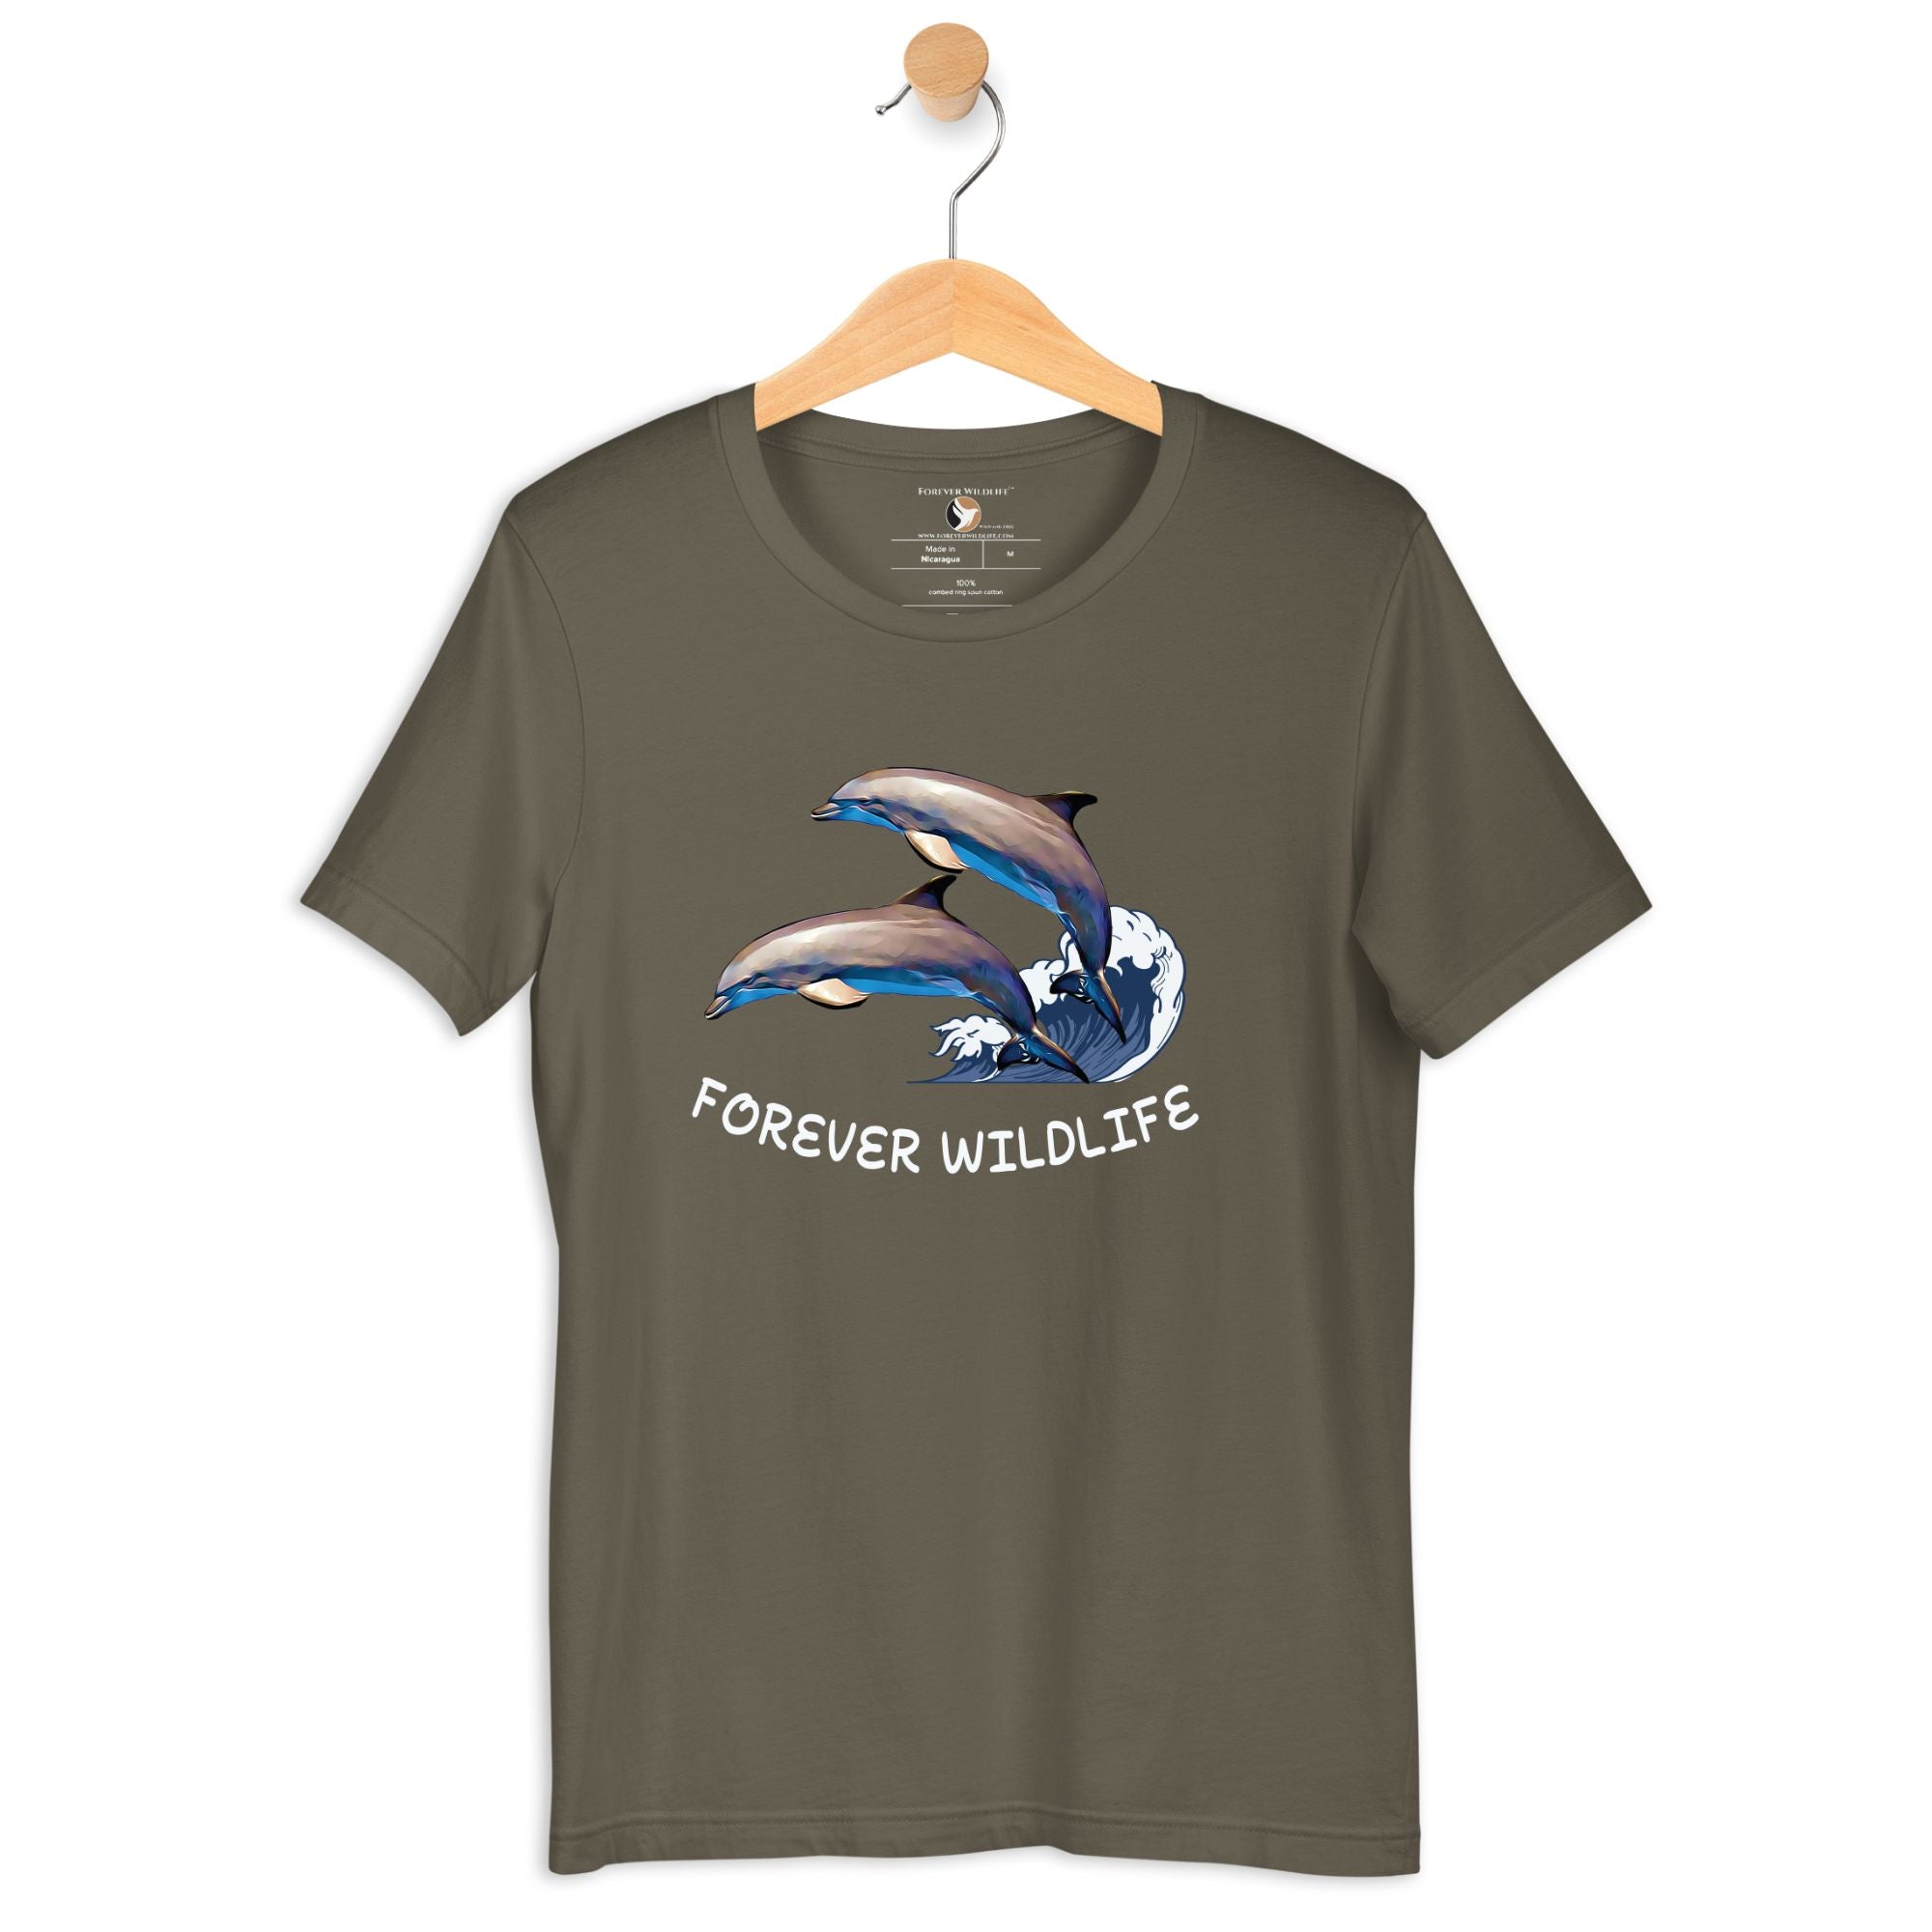 Dolphin T-Shirt in Army – Premium Wildlife T-Shirt Design, Wildlife Clothing & Apparel from Forever Wildlife